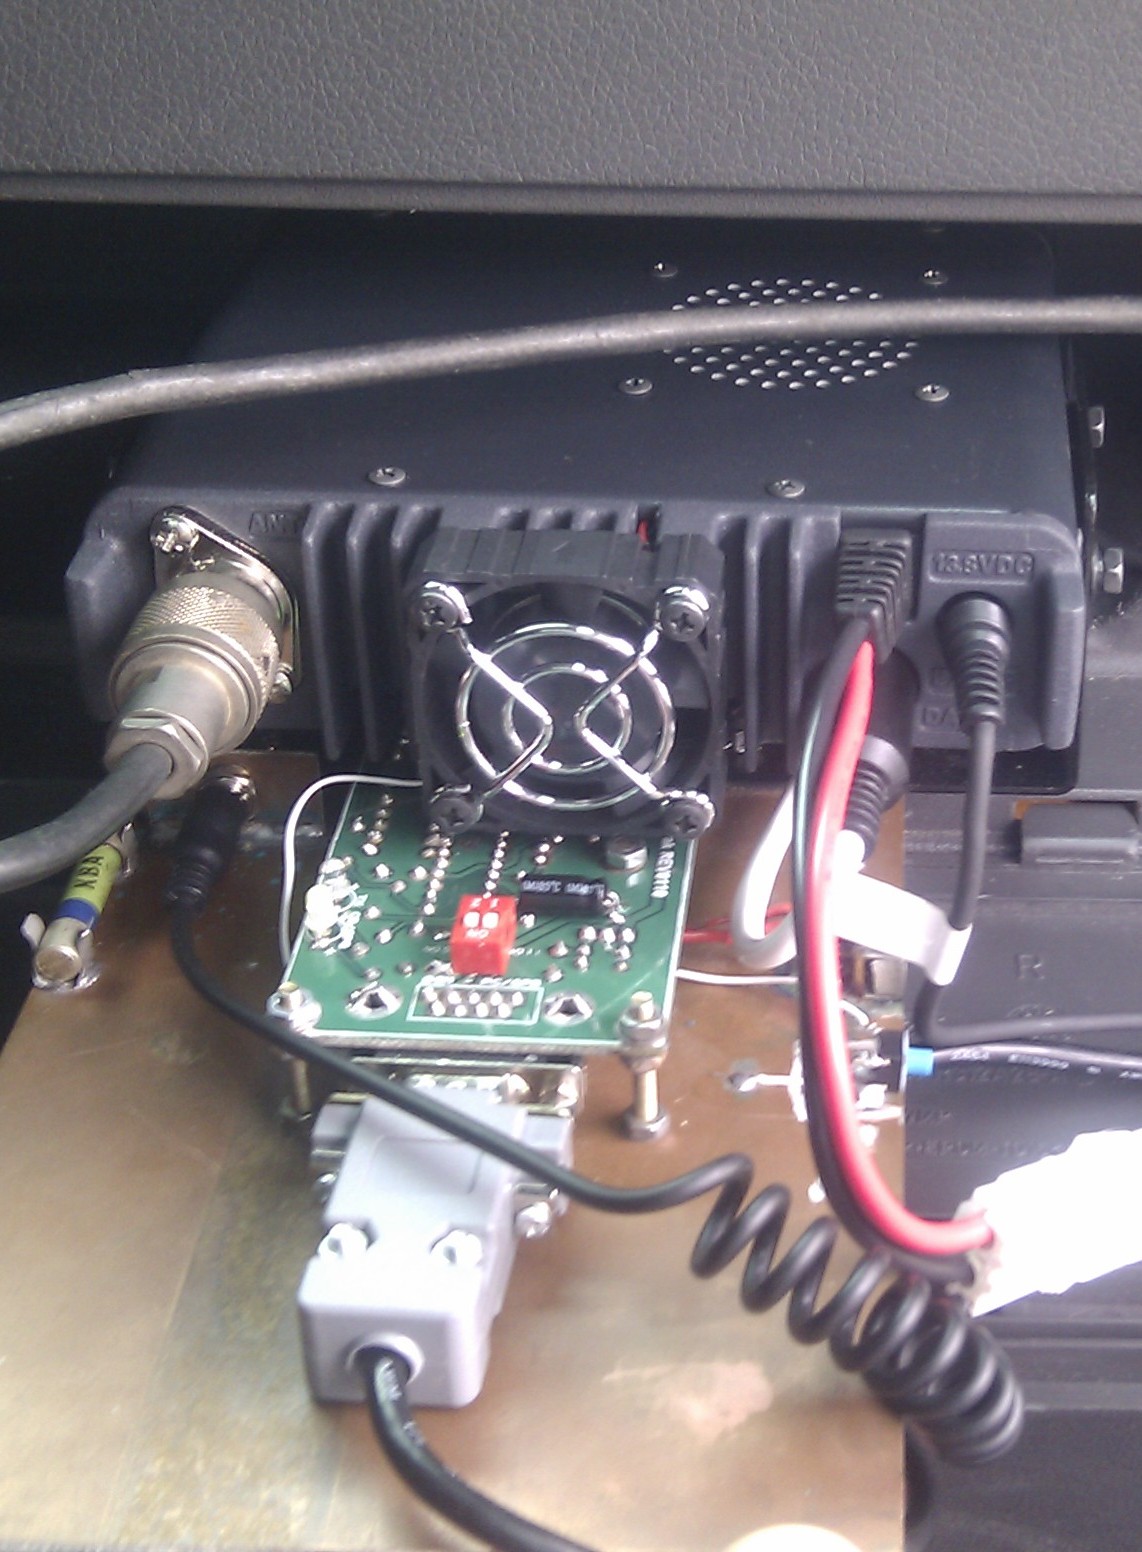 Radio and Tracker in car boot